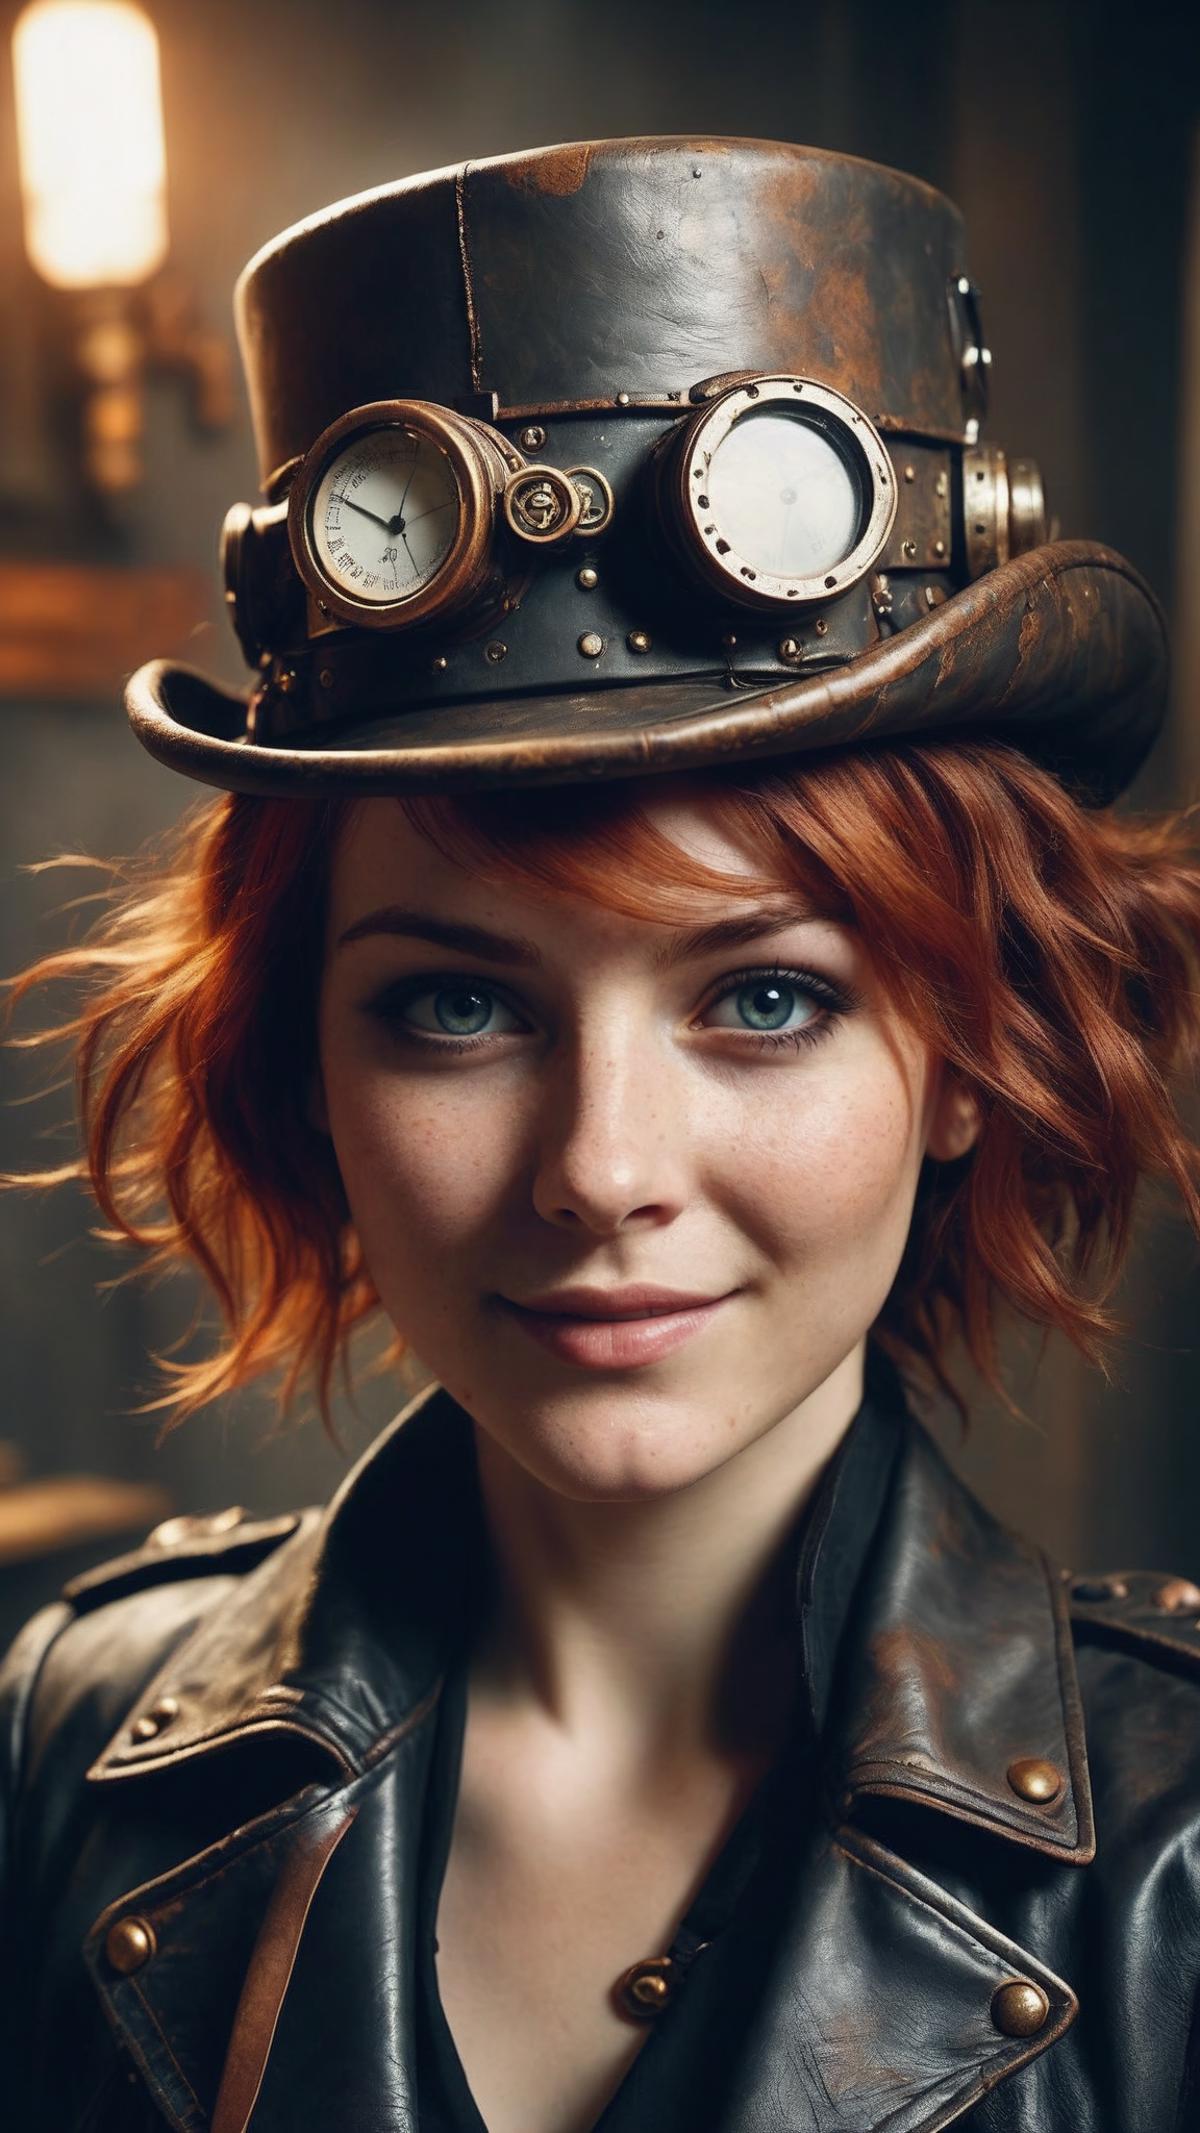 A woman wearing a steampunk hat with goggles.